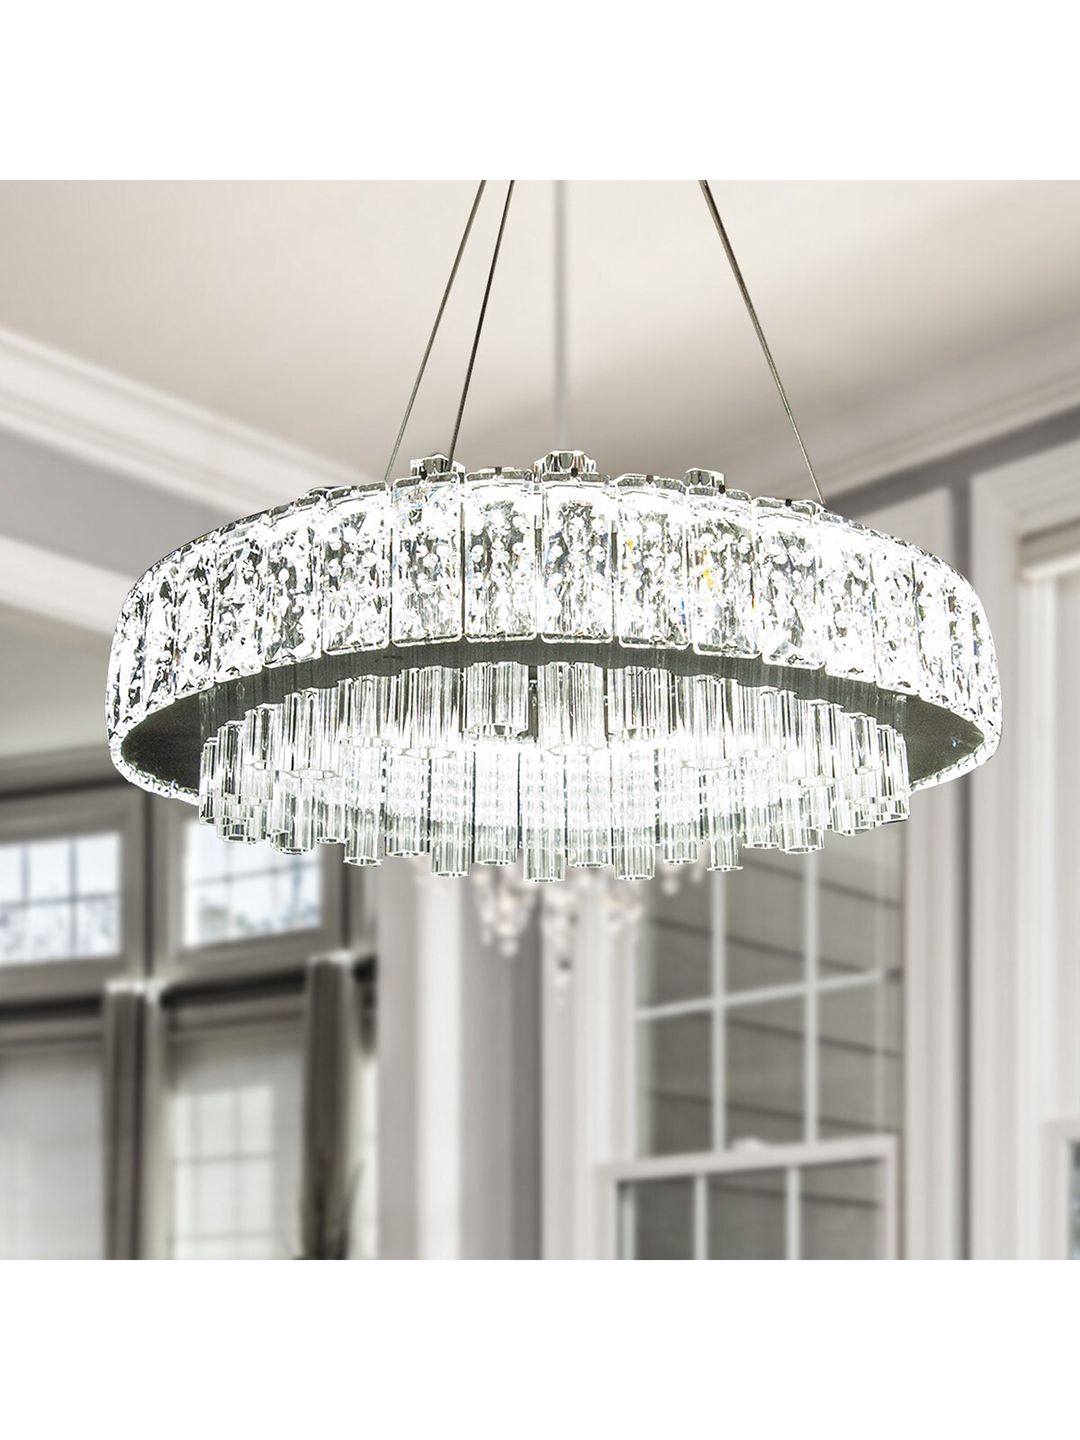 THE LIGHT STORE Transparent Textured Contemporary Pendant Lamp Price in India